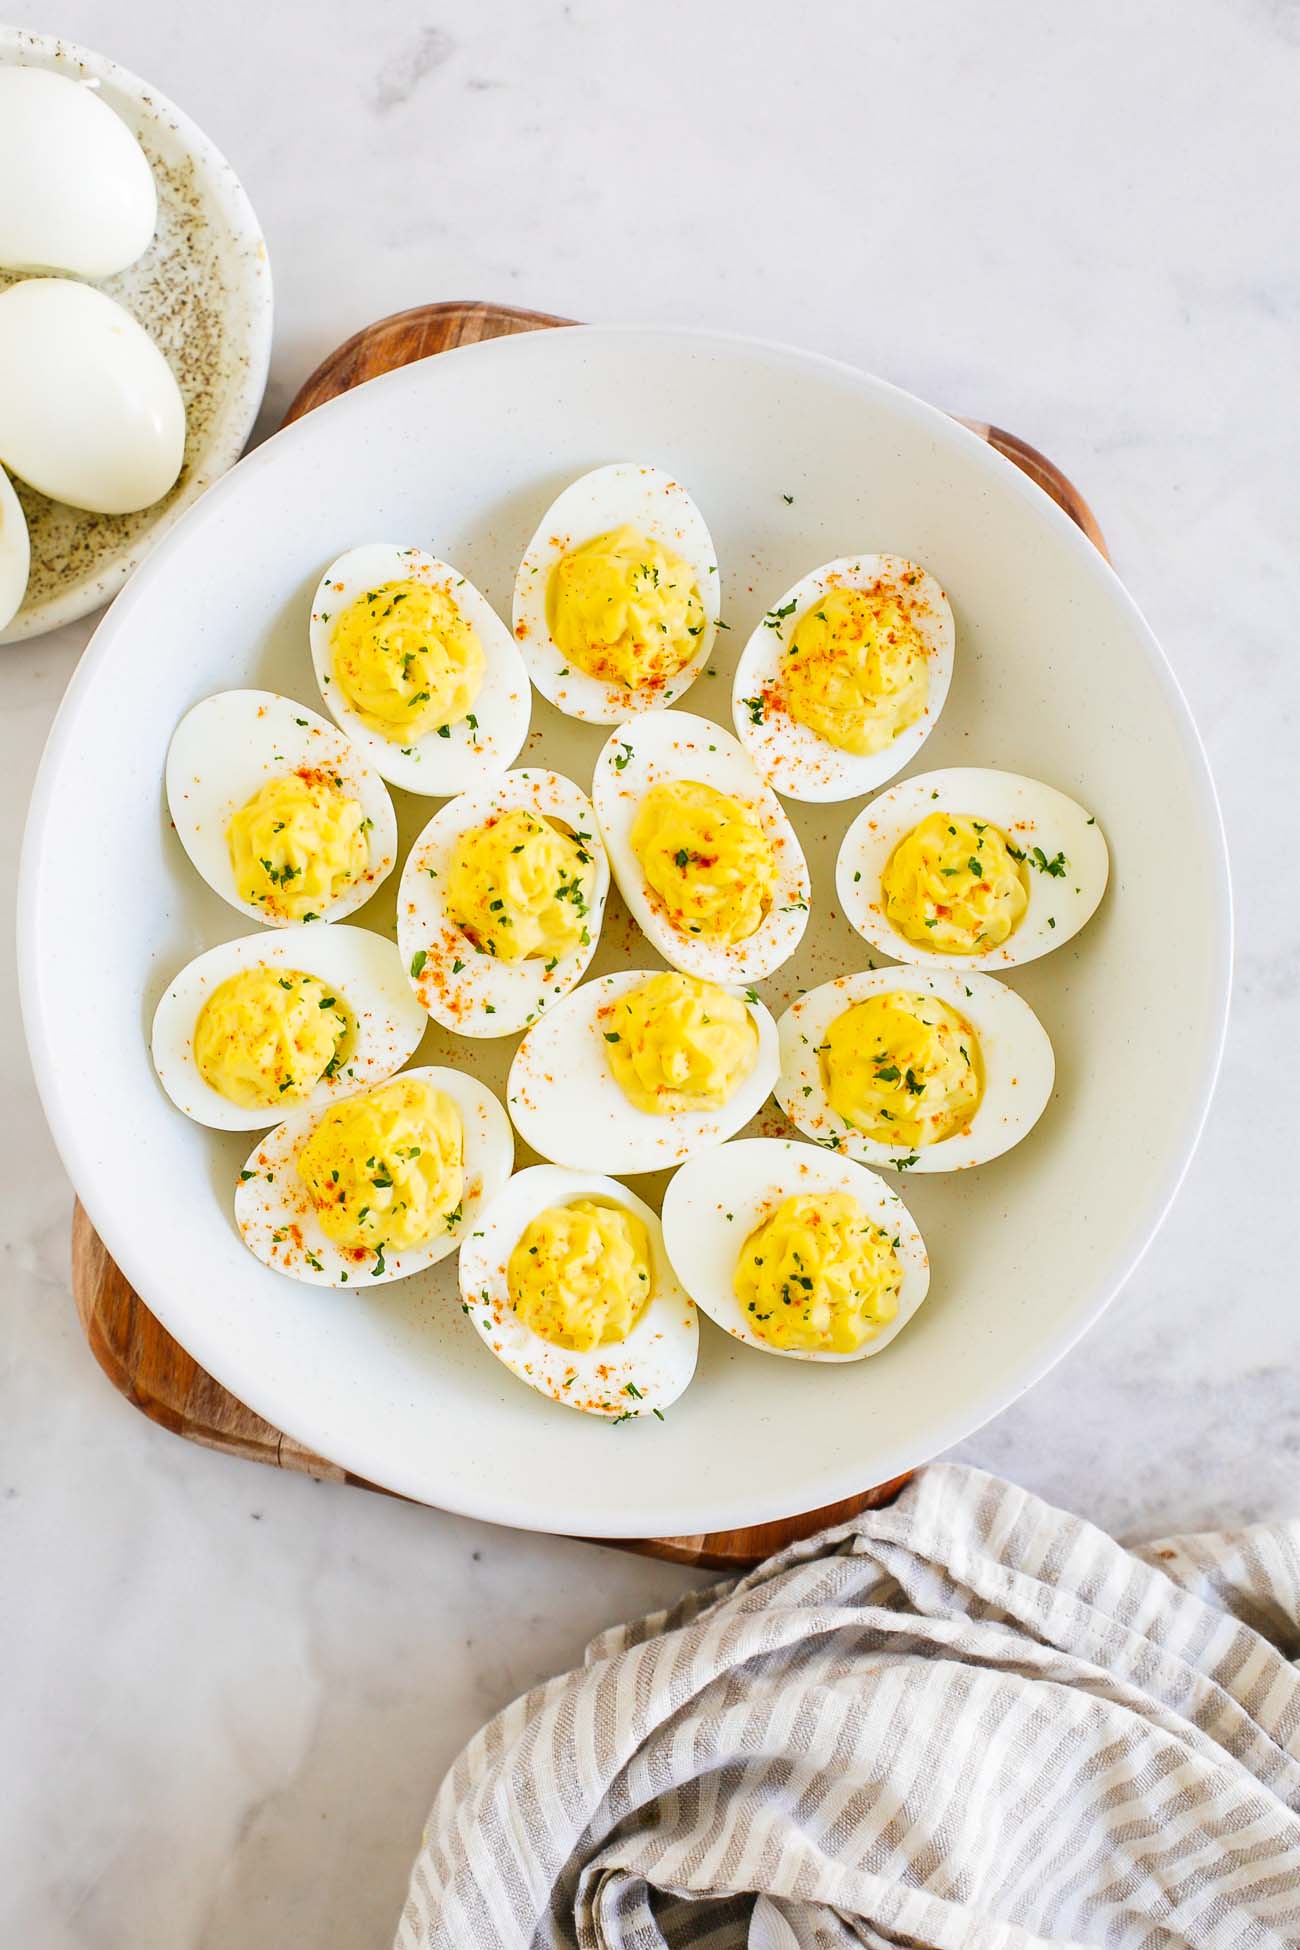 A platter of easy deviled eggs garnished with chives and paprika.